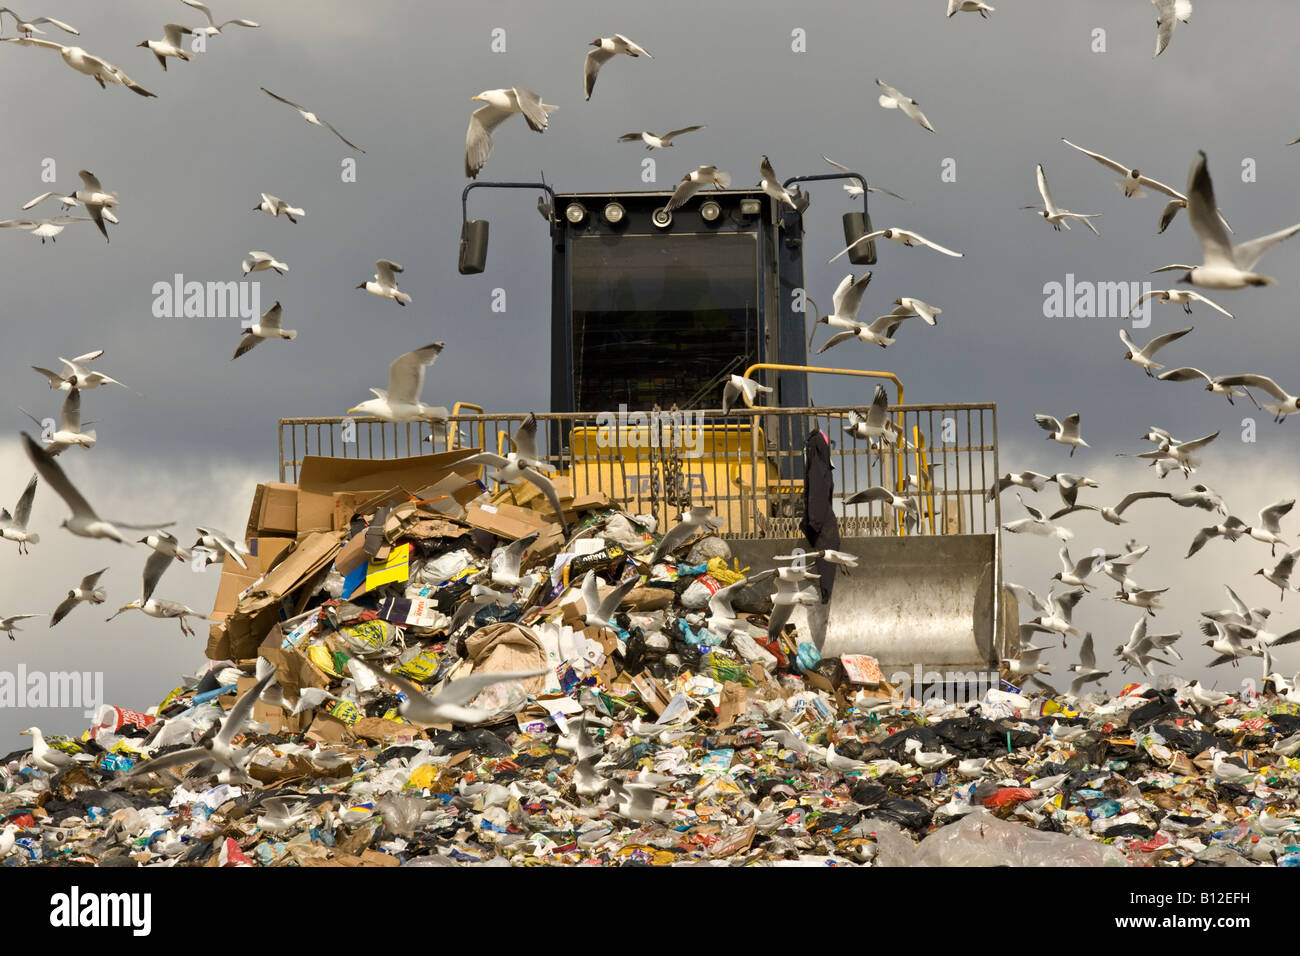 Rubbish and bulldozer surrounded by gulls on refuse tip in Finland Stock Photo